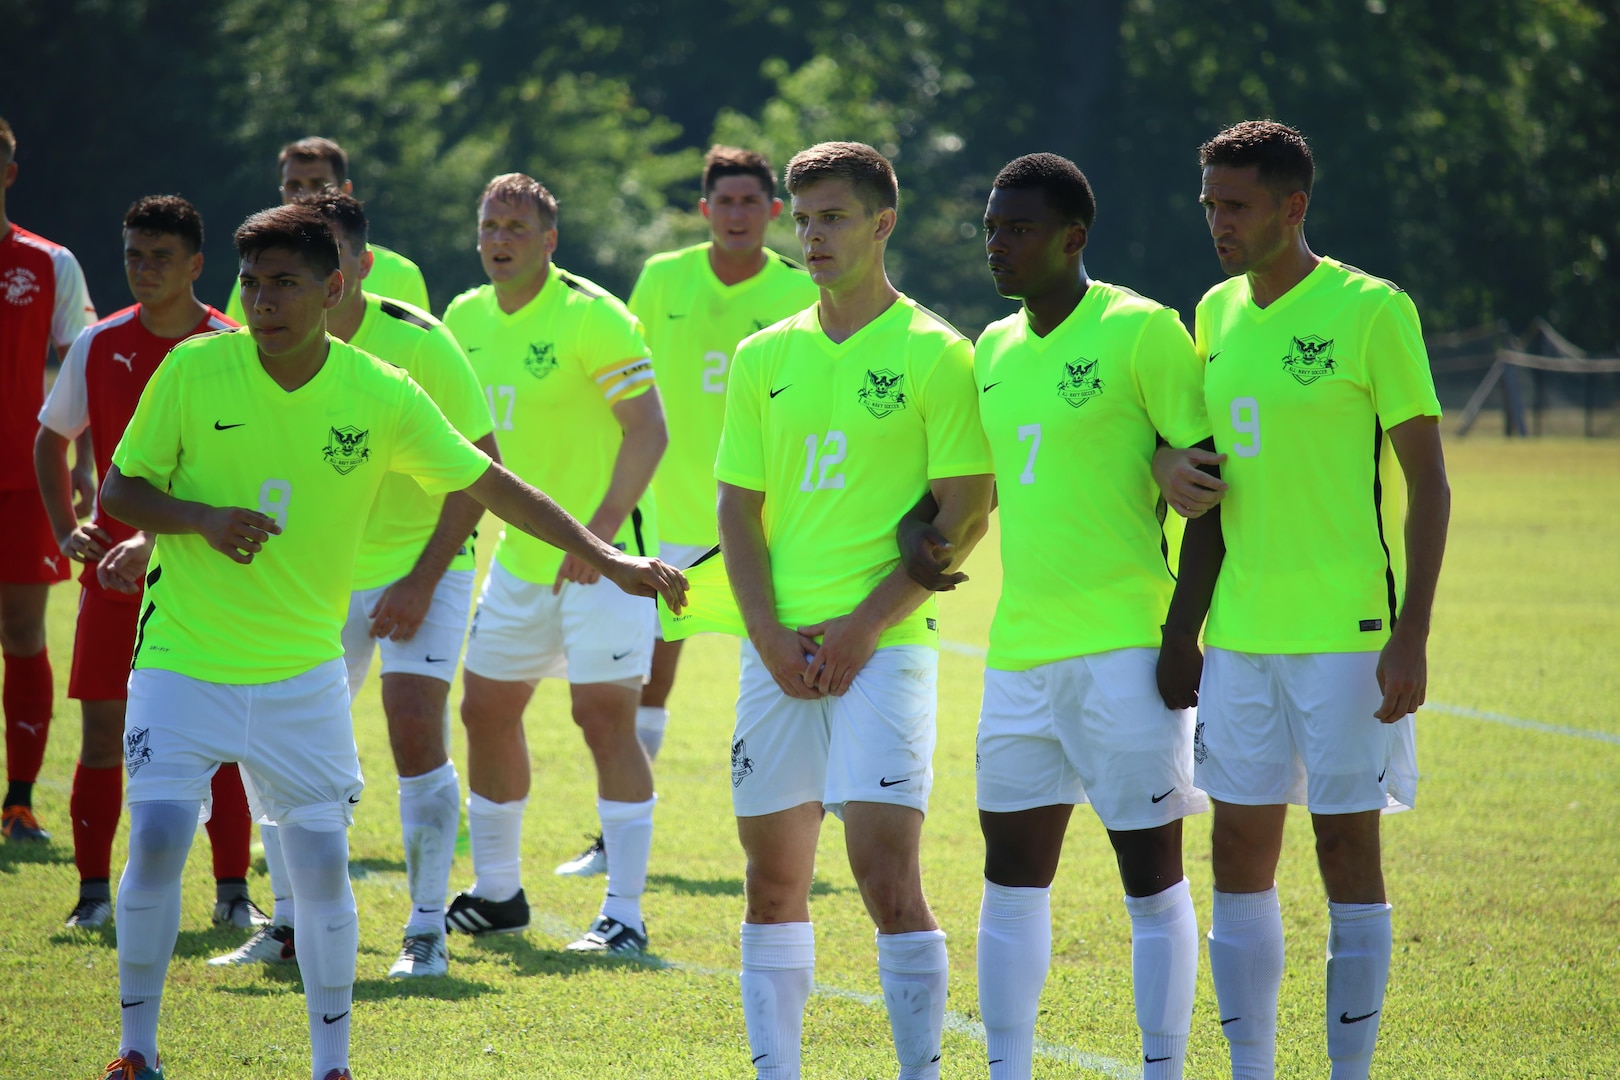 Navy defenders line up against a Marine Corps attack.  Navy defeated the Marines 2-1 to win match five of the 2016 Armed Forces Men's Soccer Championship hosted at Fort Benning, Ga from 6-14 May 2016.  Navy advances to the Championship Match versus Air Force.